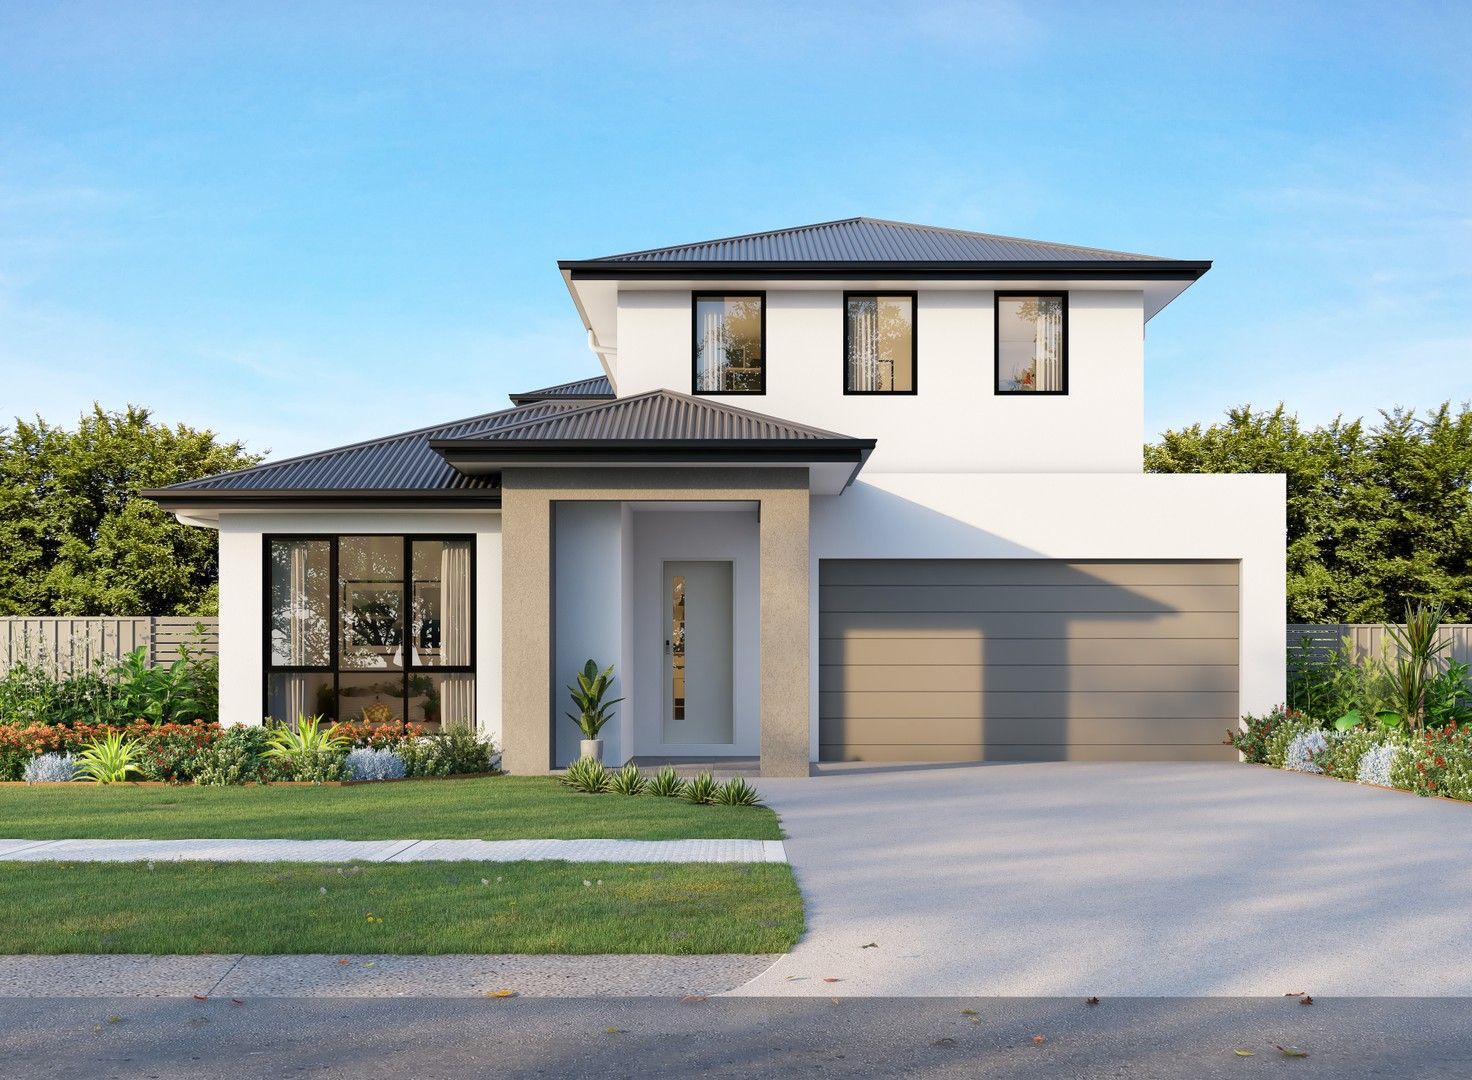 4 bedrooms New House & Land in 226 Bayview Road MERNDA VIC, 3754